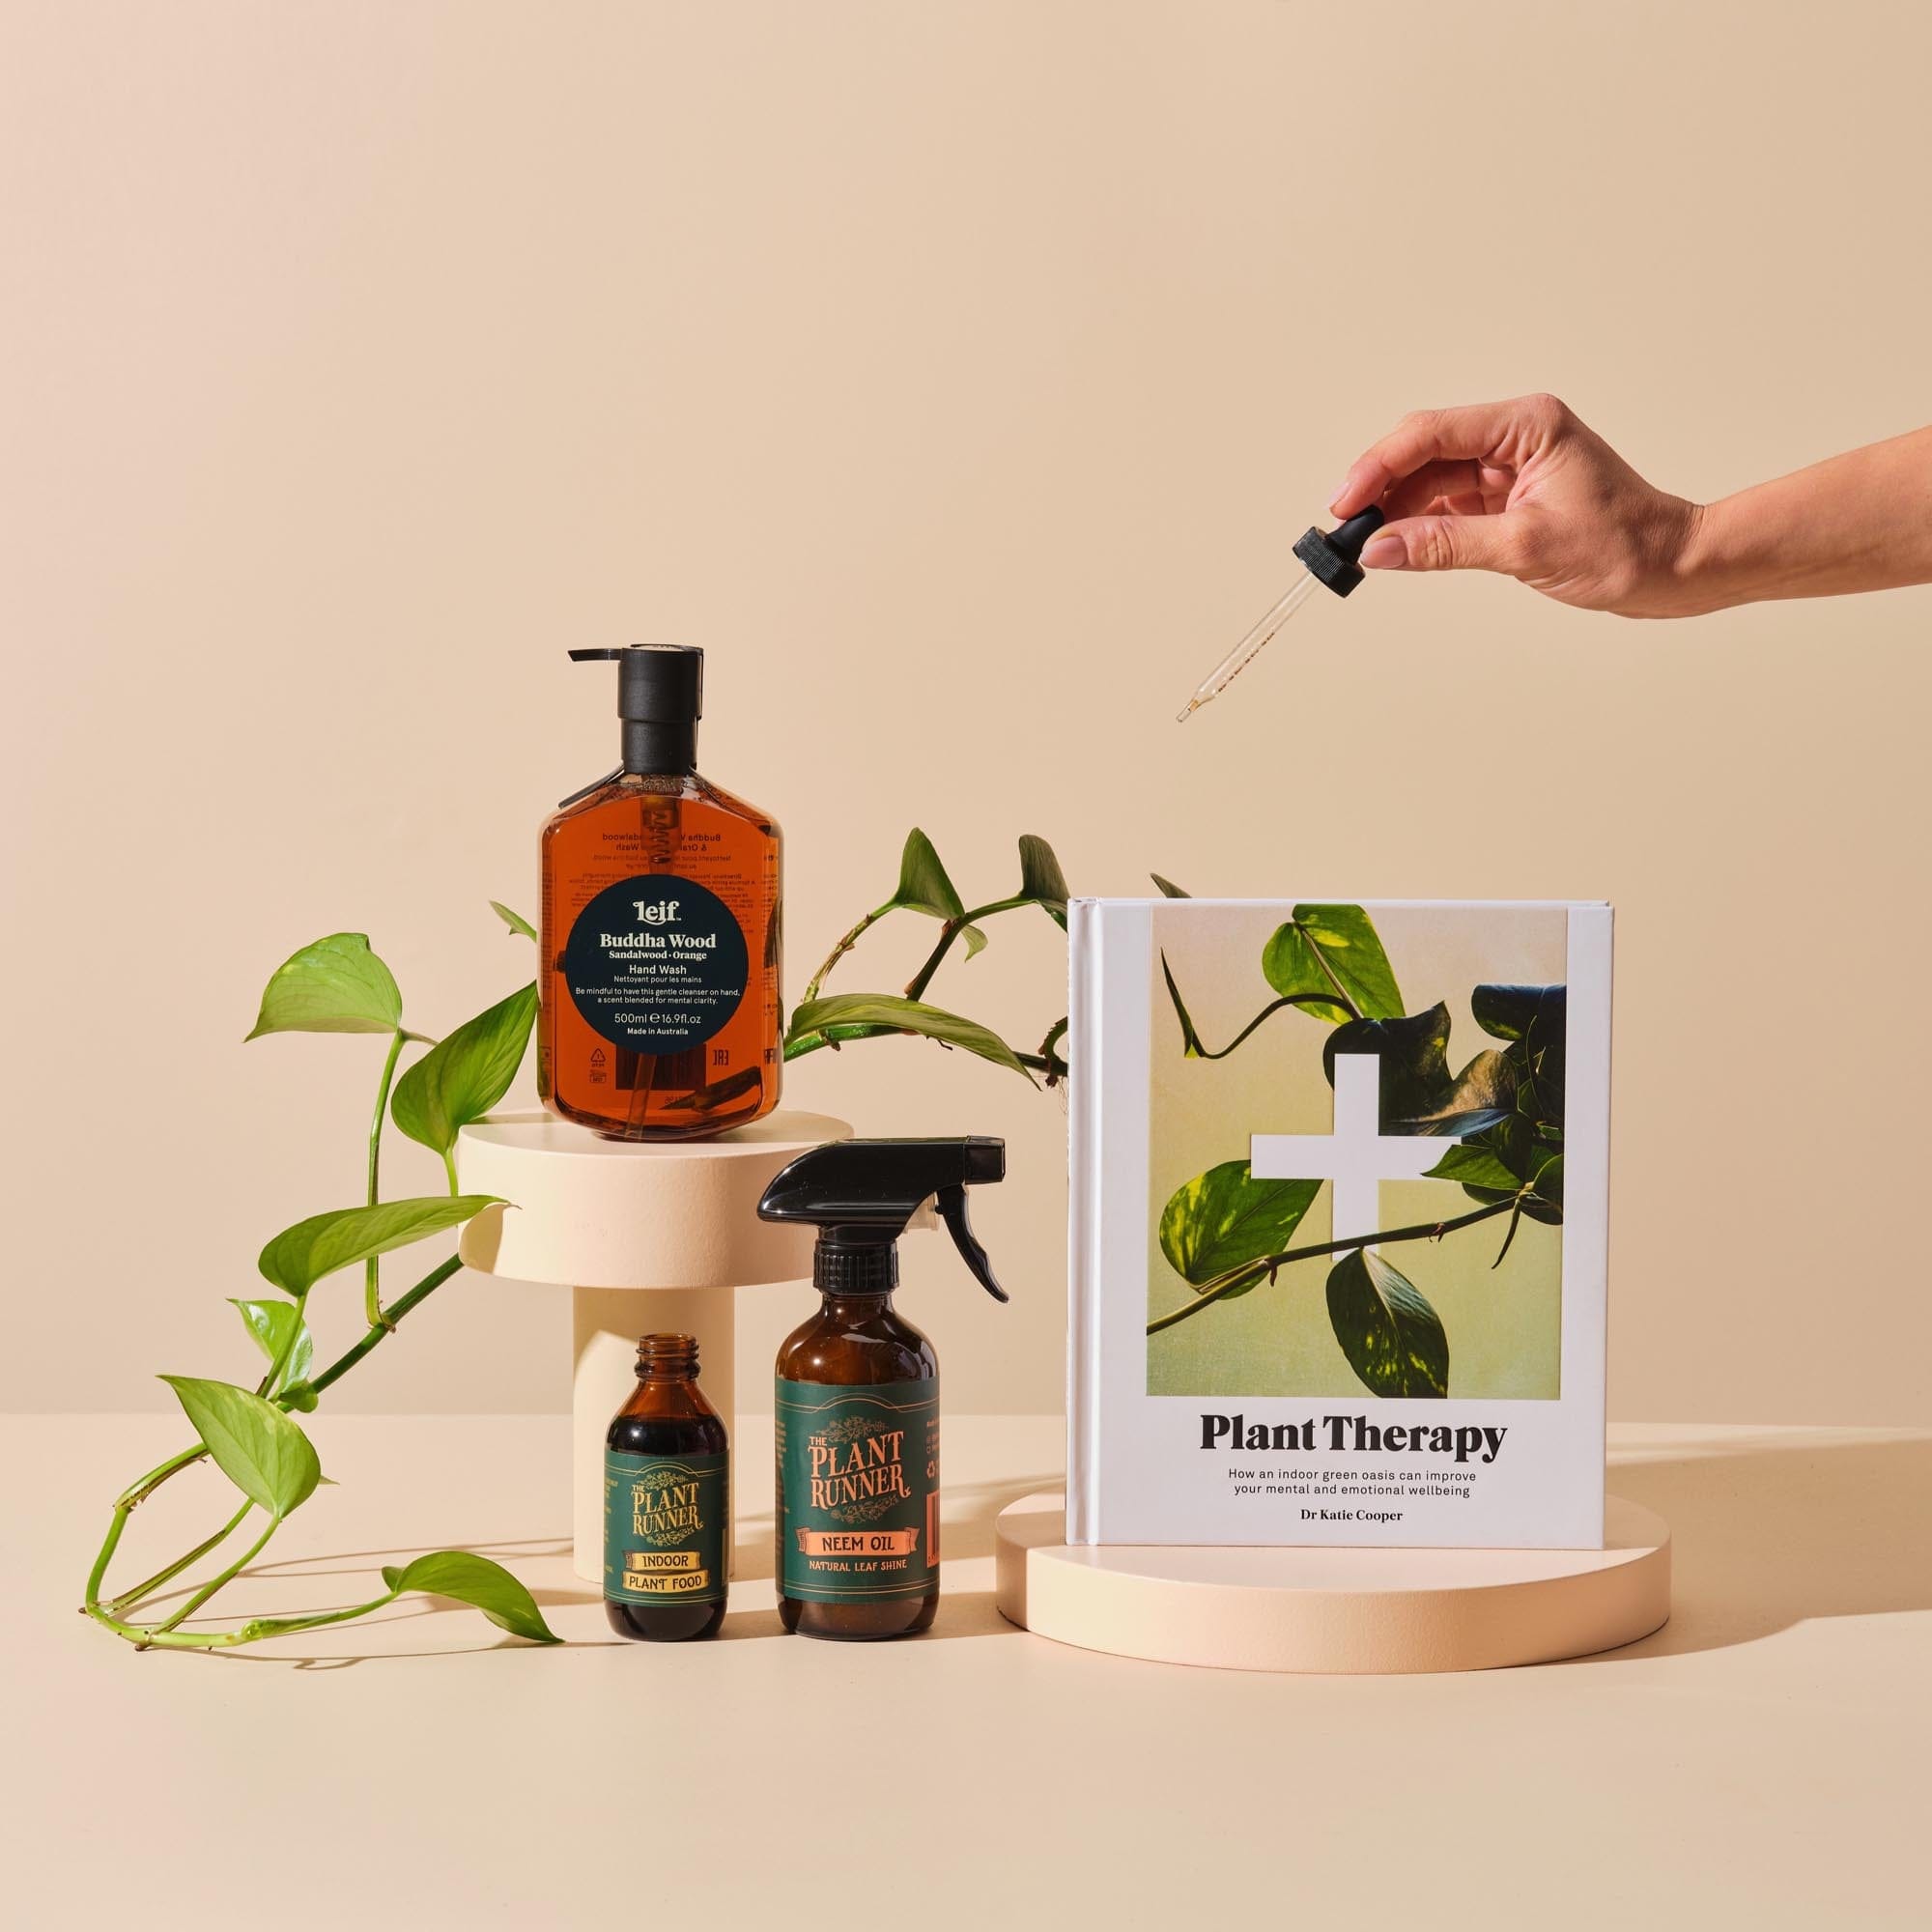 This is the Green Thumb bundle from Handsel. Included in this image is Plant therapy, Plant care essentials and Buddha wood handwash 